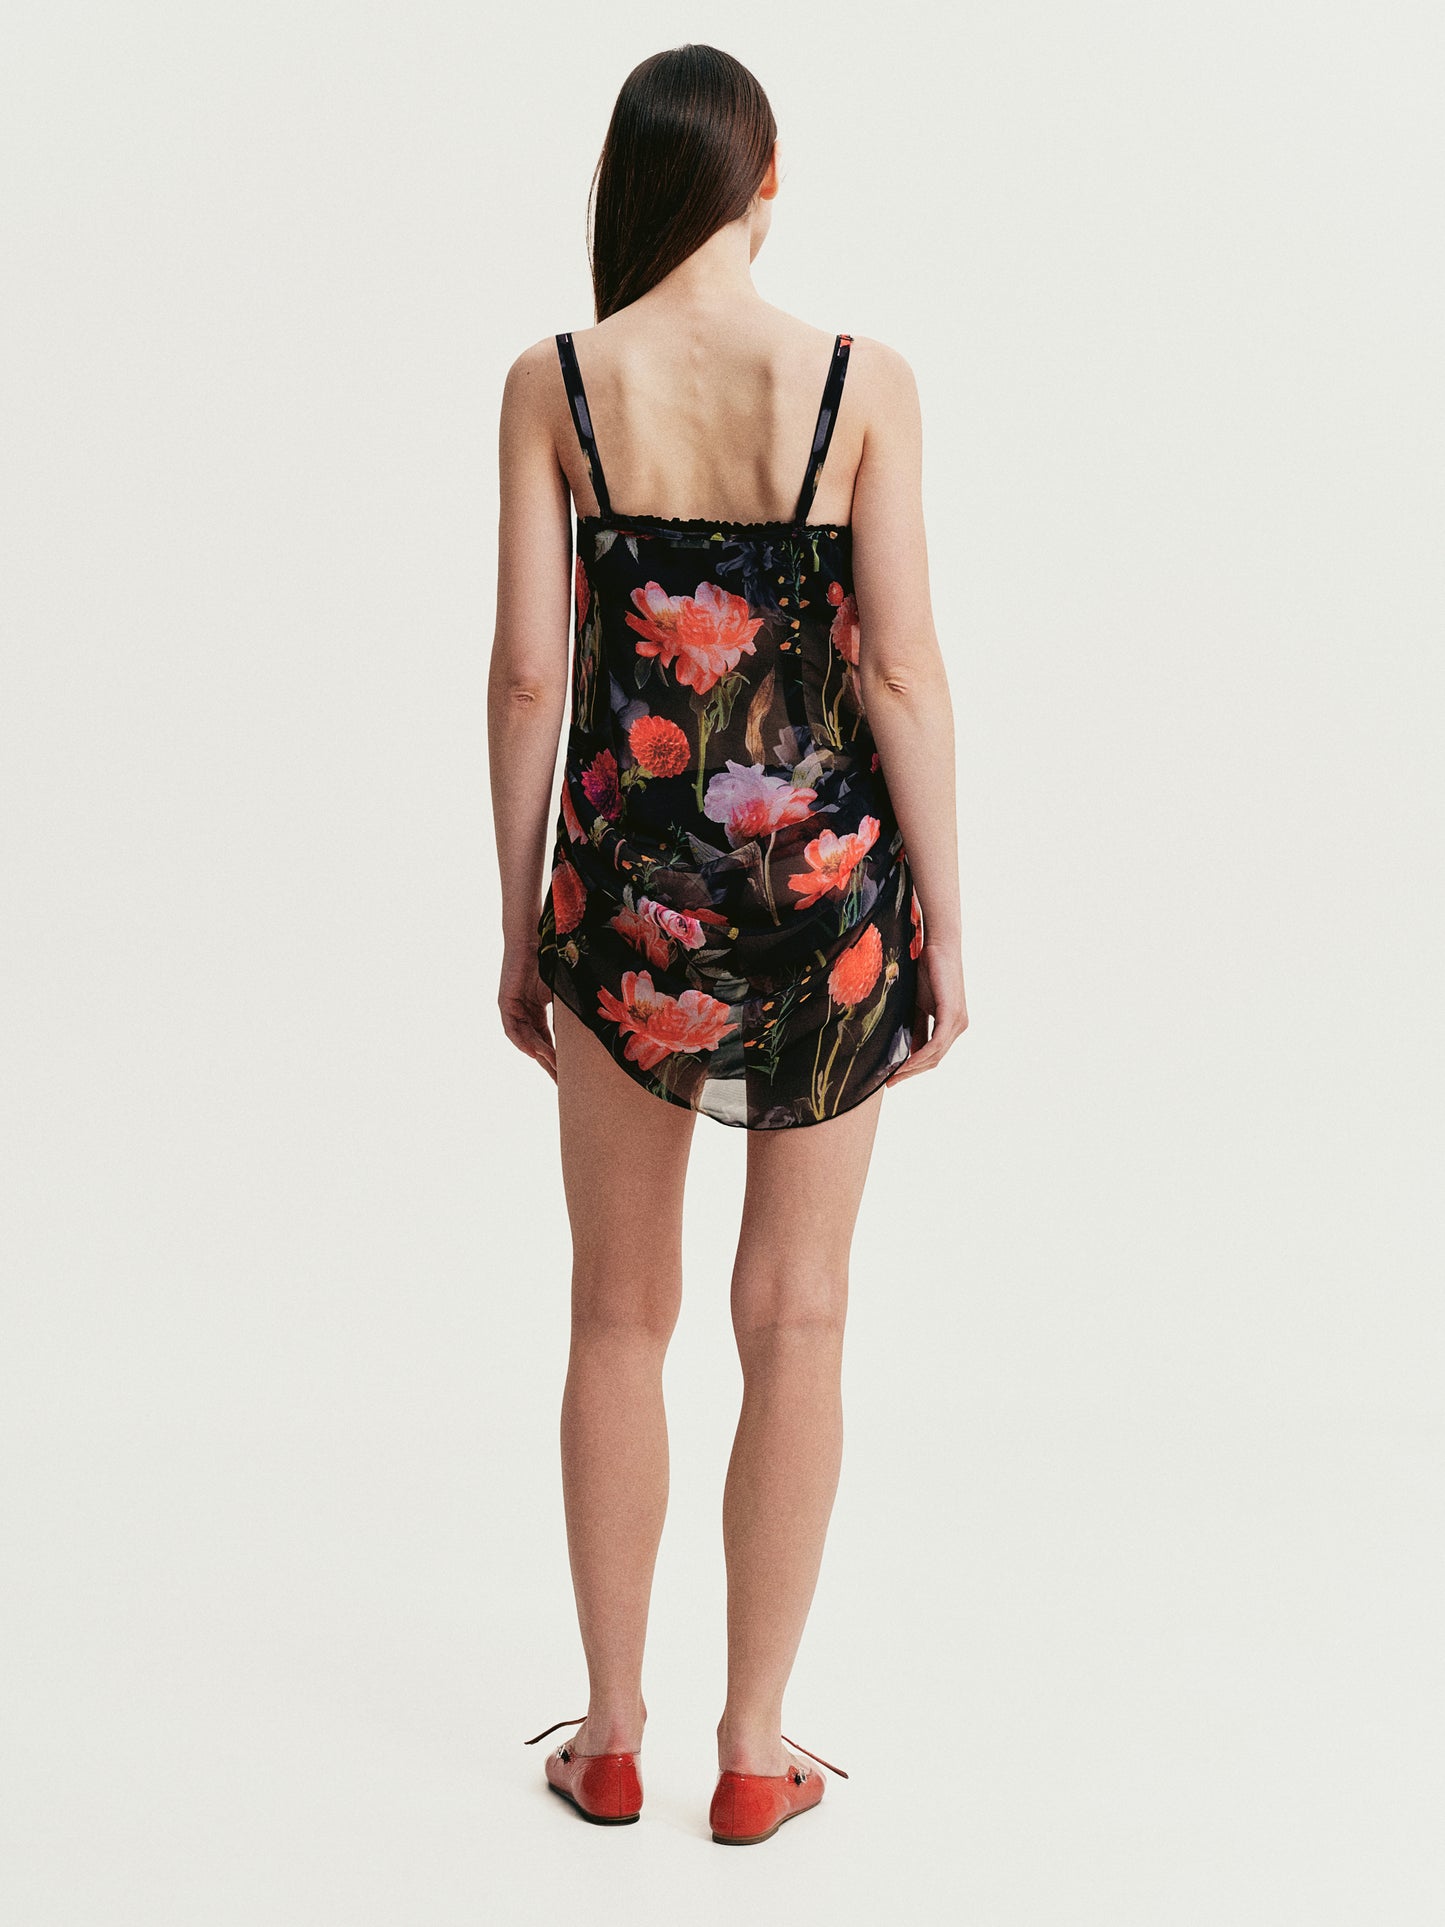 Transparent dress with flowers